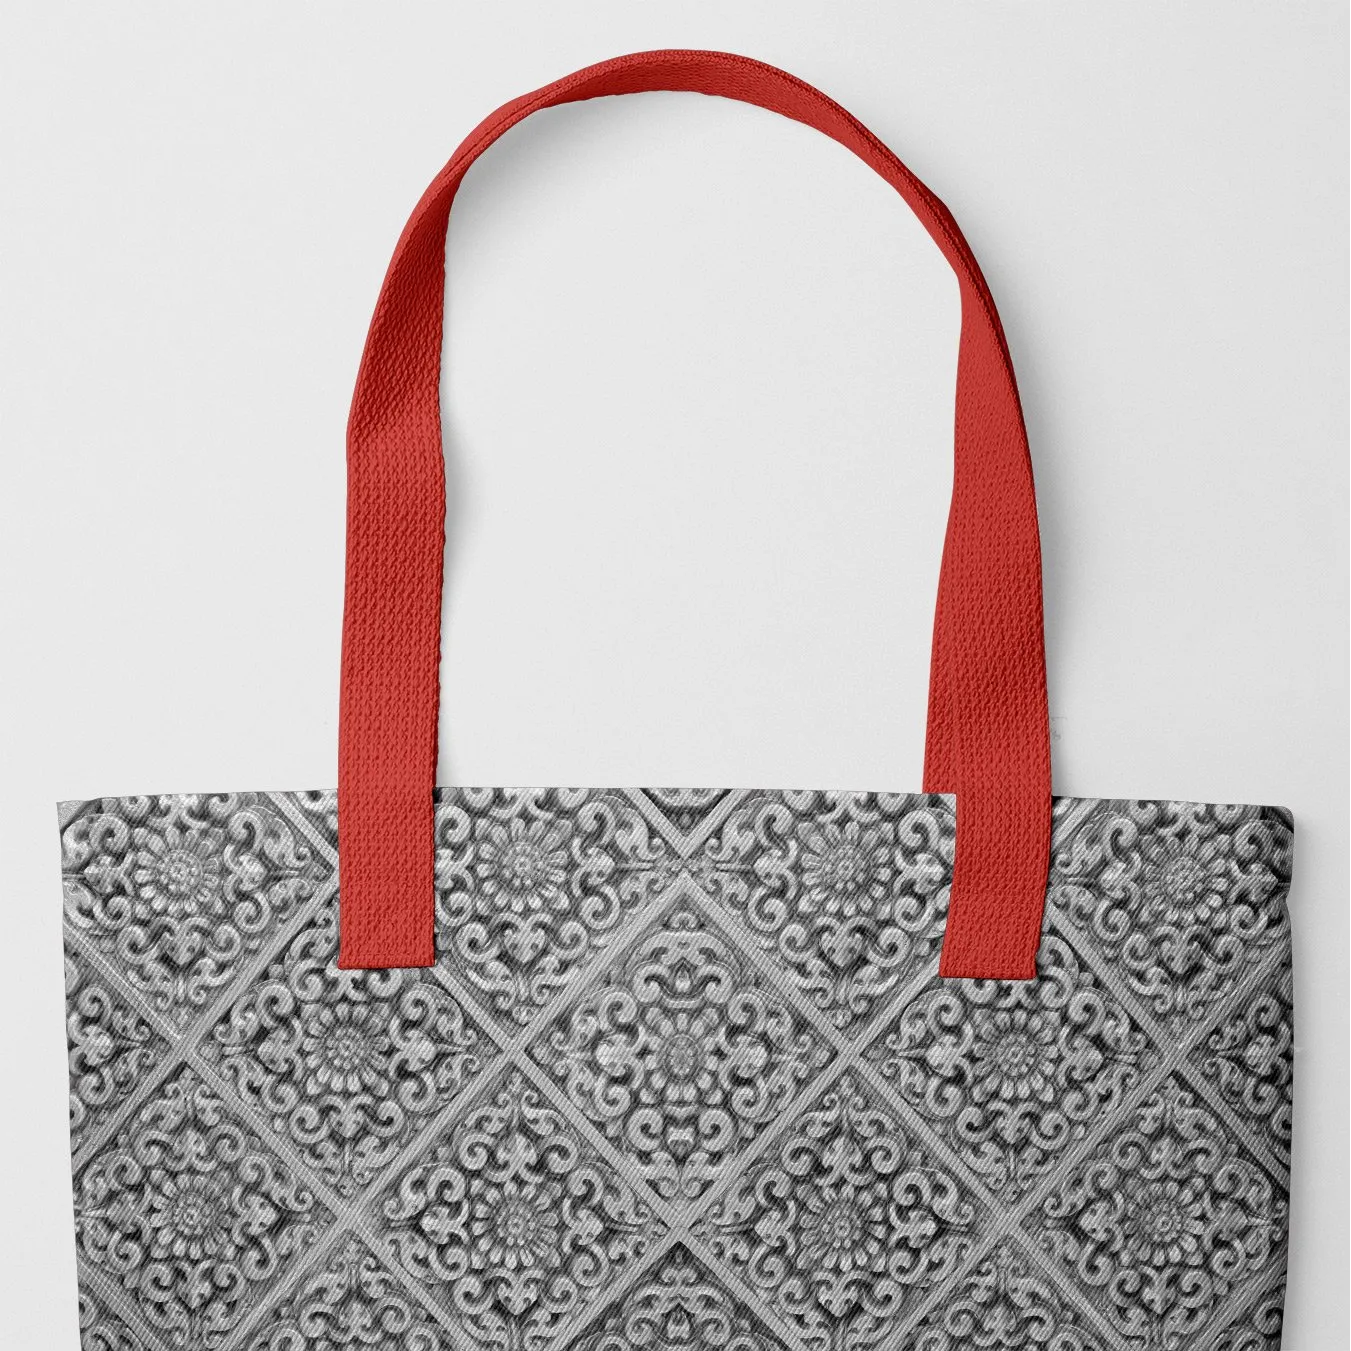 Flower Maze Tote - Black And White - Heavy Duty Reusable Grocery Bag - Red Handles - Tote Bags - Aesthetic Art